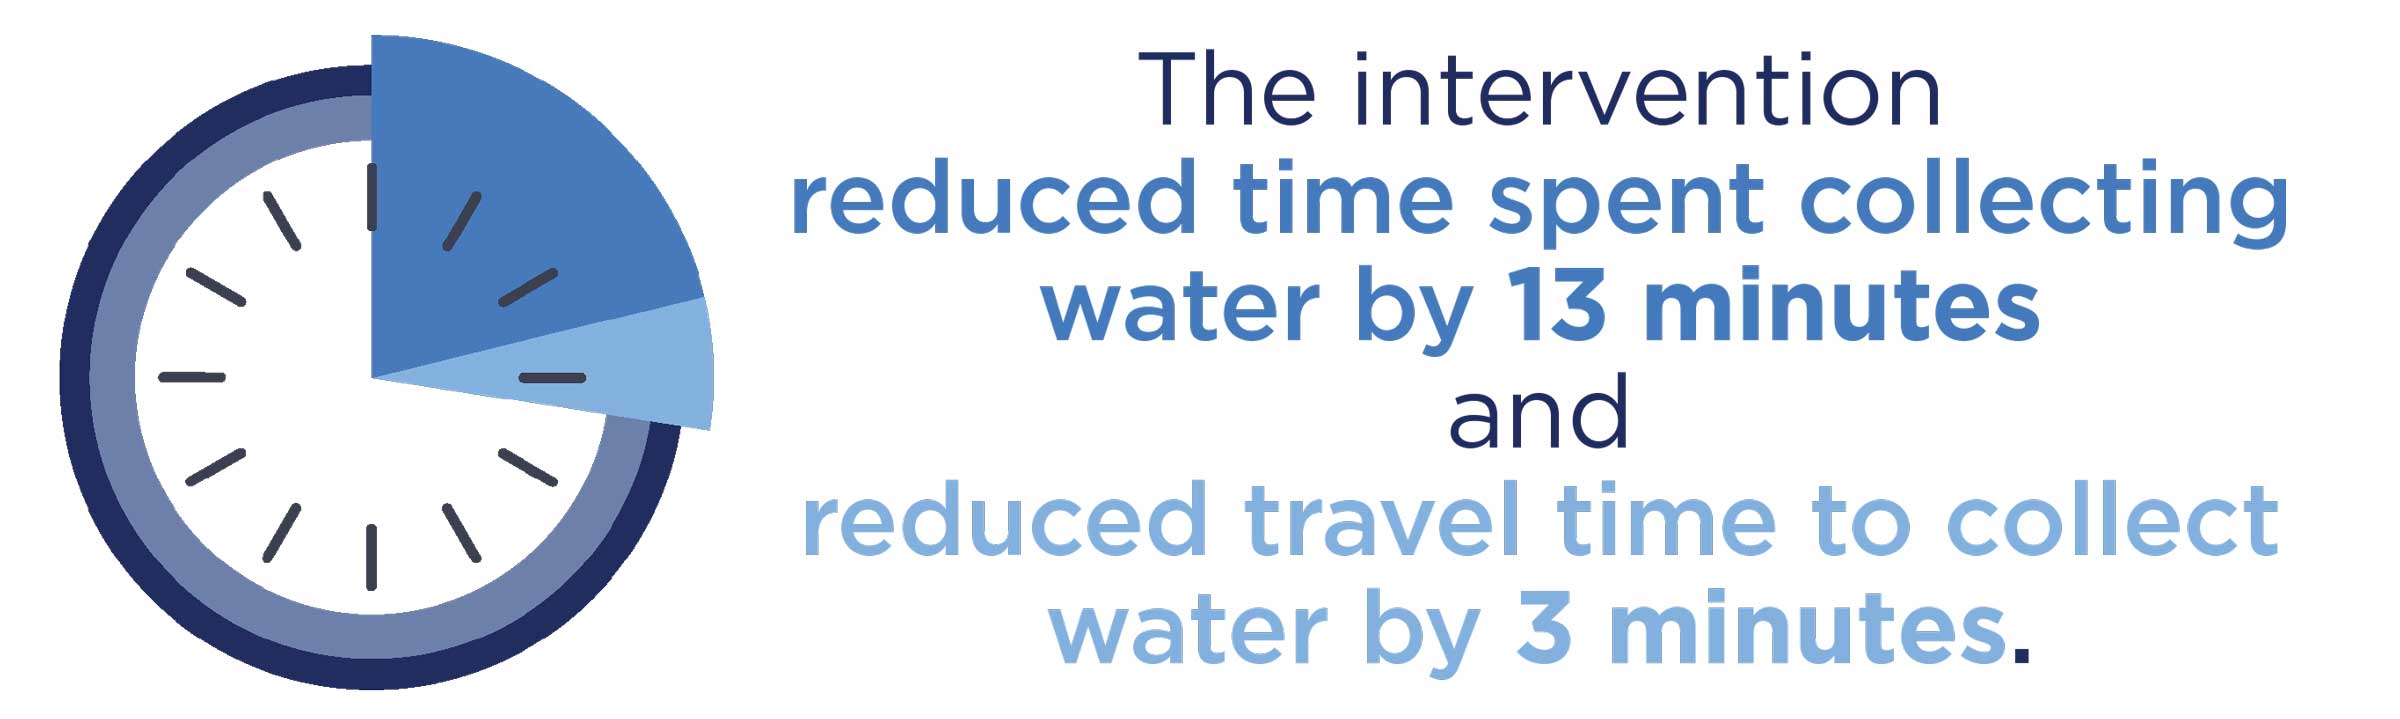 The intervention reduced time spent collecting water by 13 minutes and reduced travel time to collect water by 3 minutes.